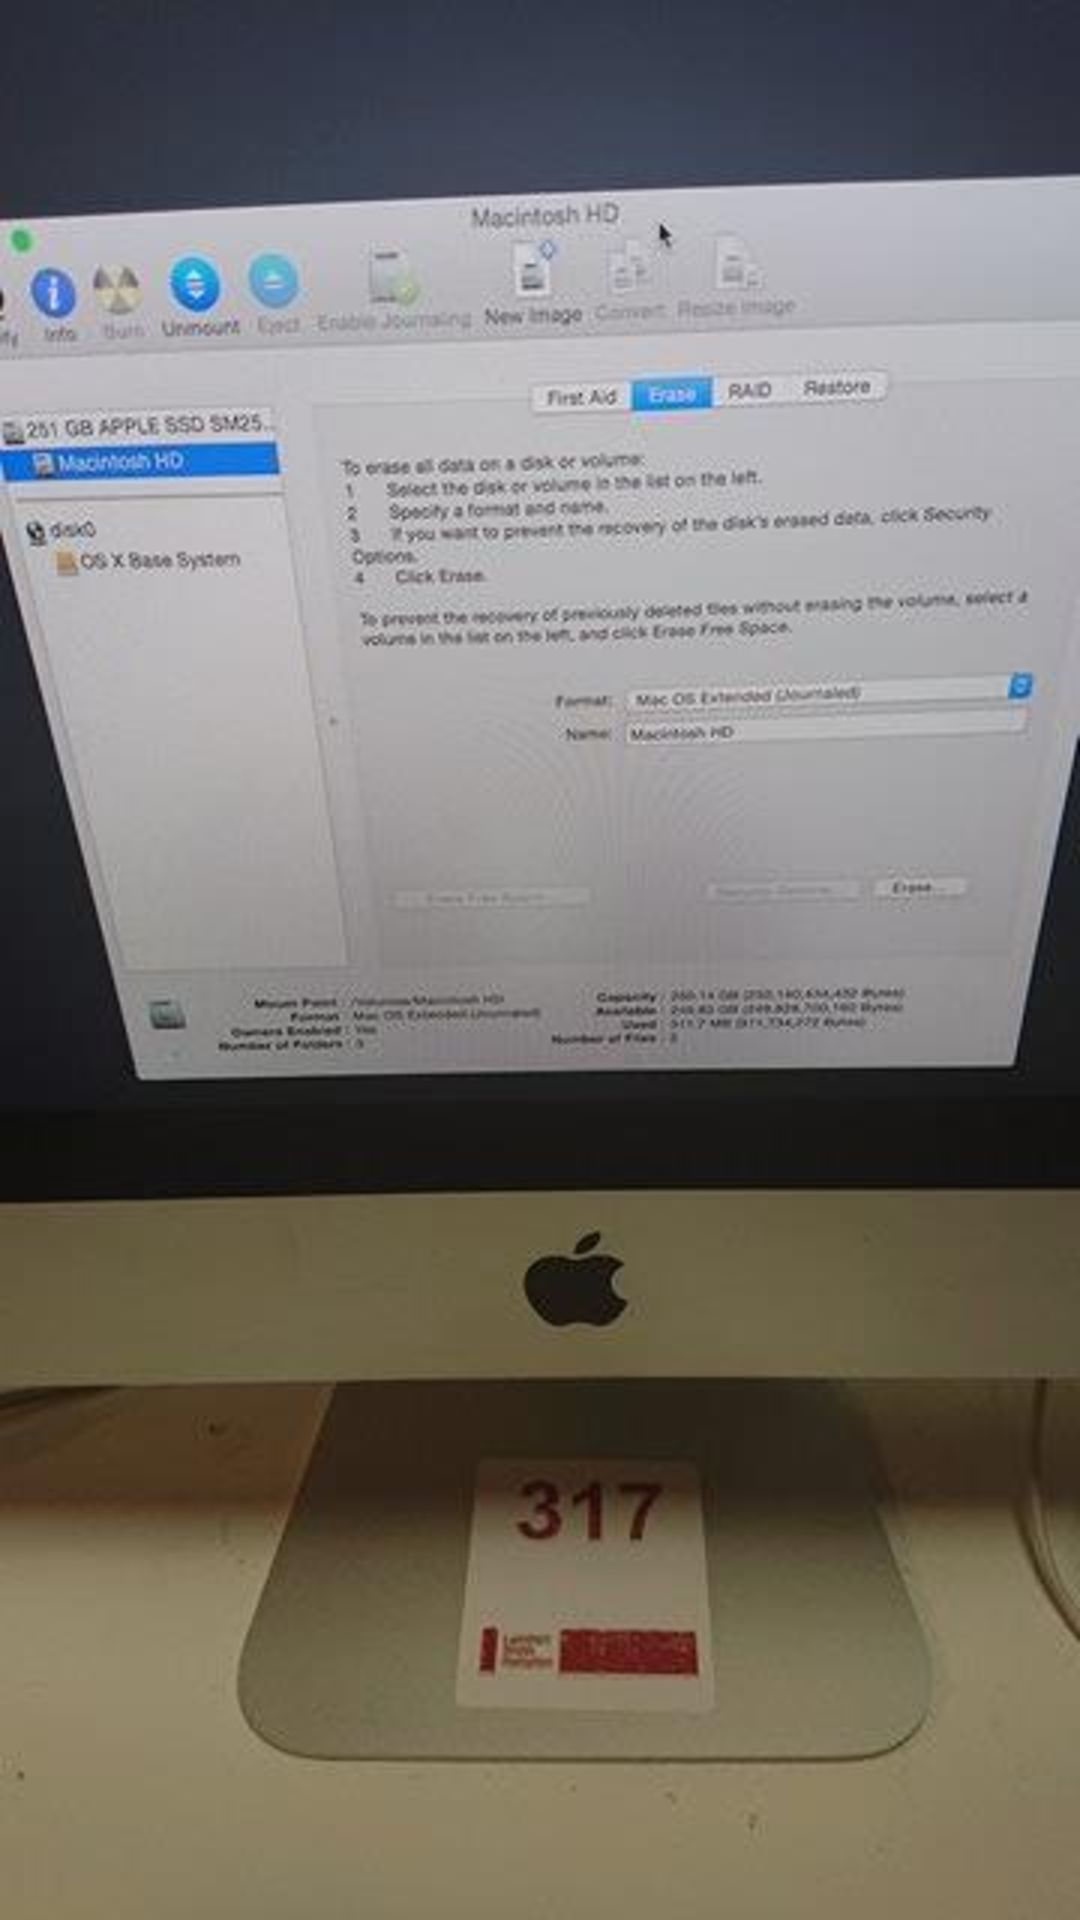 iMac 21.5" 2.7 GHz Intel Core i5 8Gb RAM 250Gb HD PC serial number DGKL404SDNML - Image 3 of 3